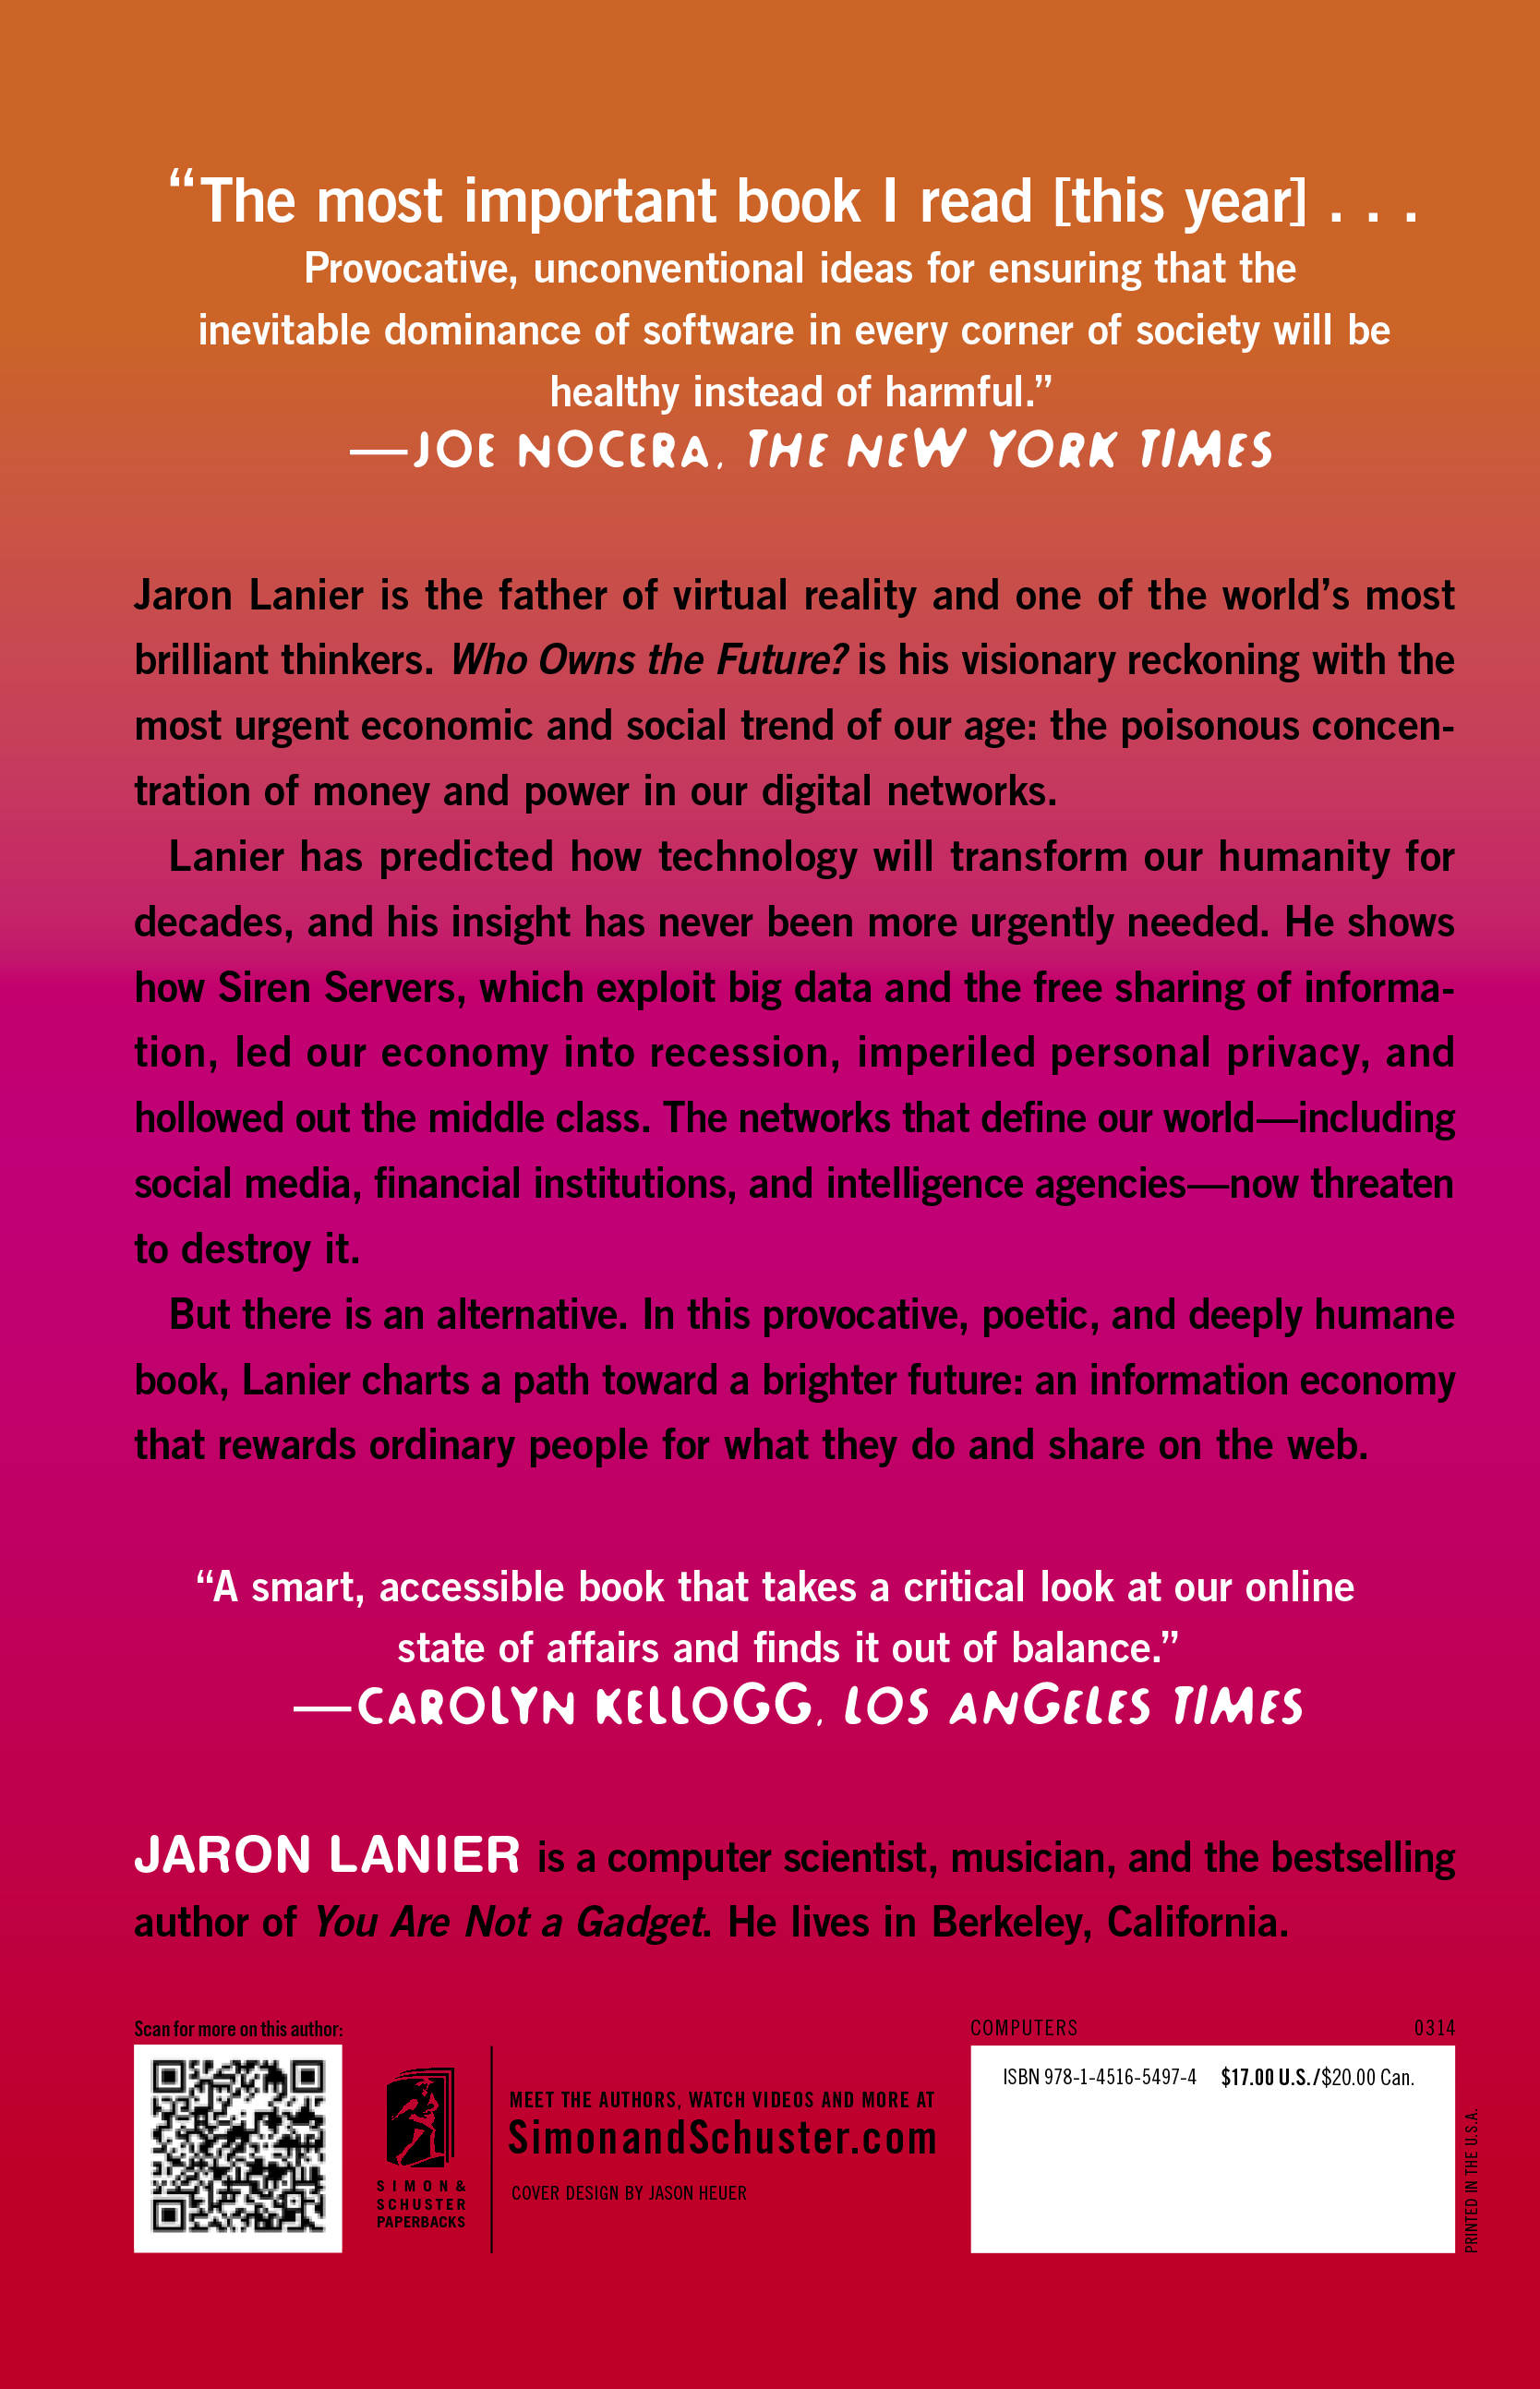 Paperback Edition Back Cover